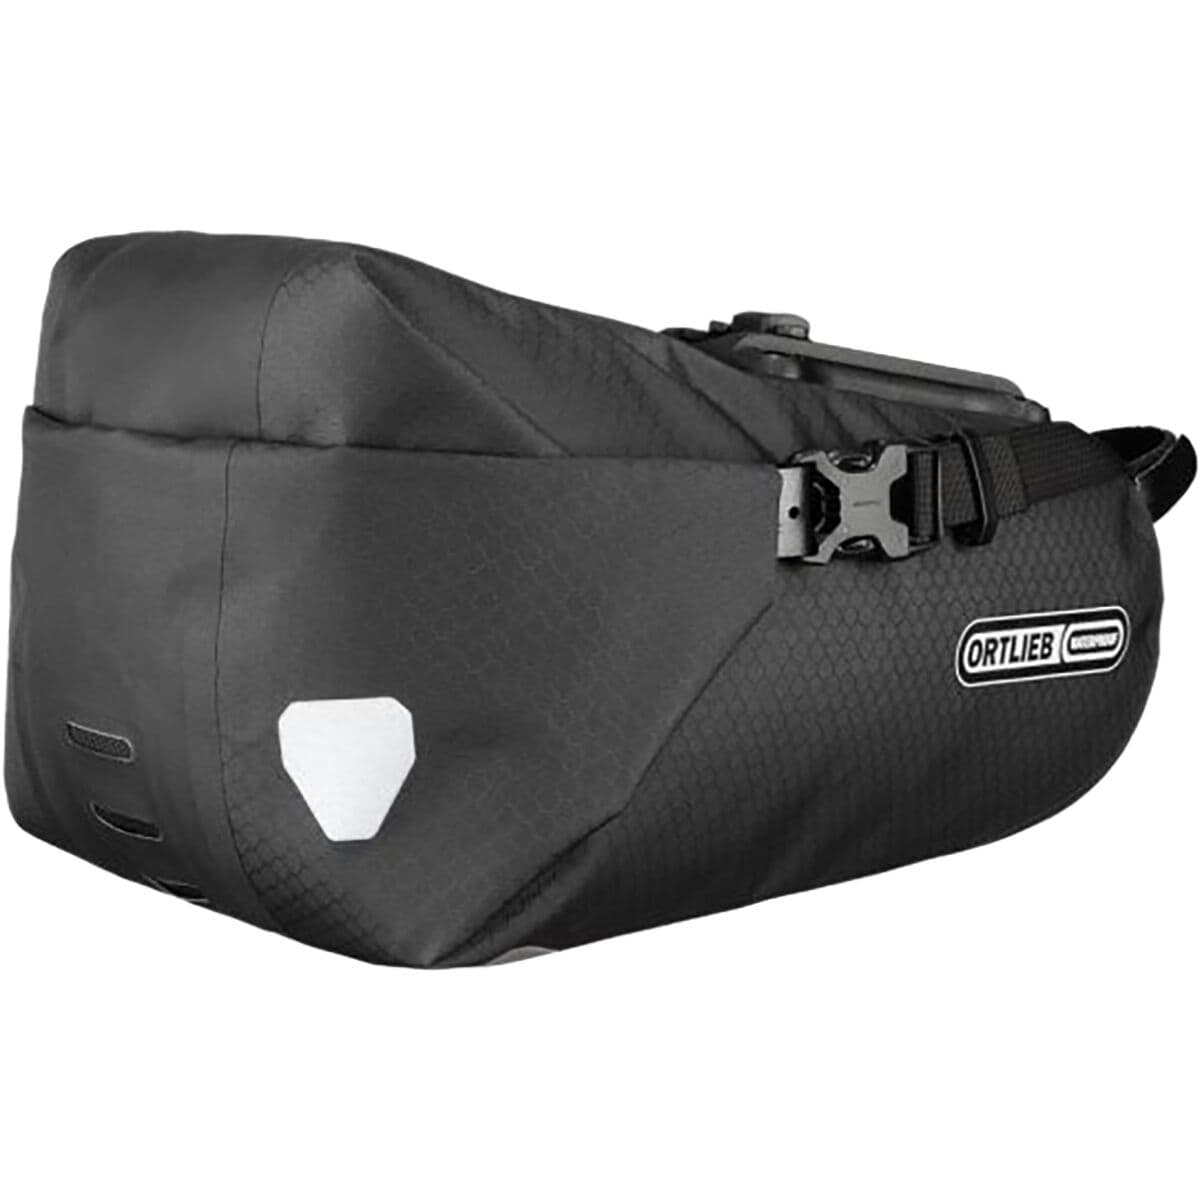 Ortlieb Saddle Bag Two - Accessories